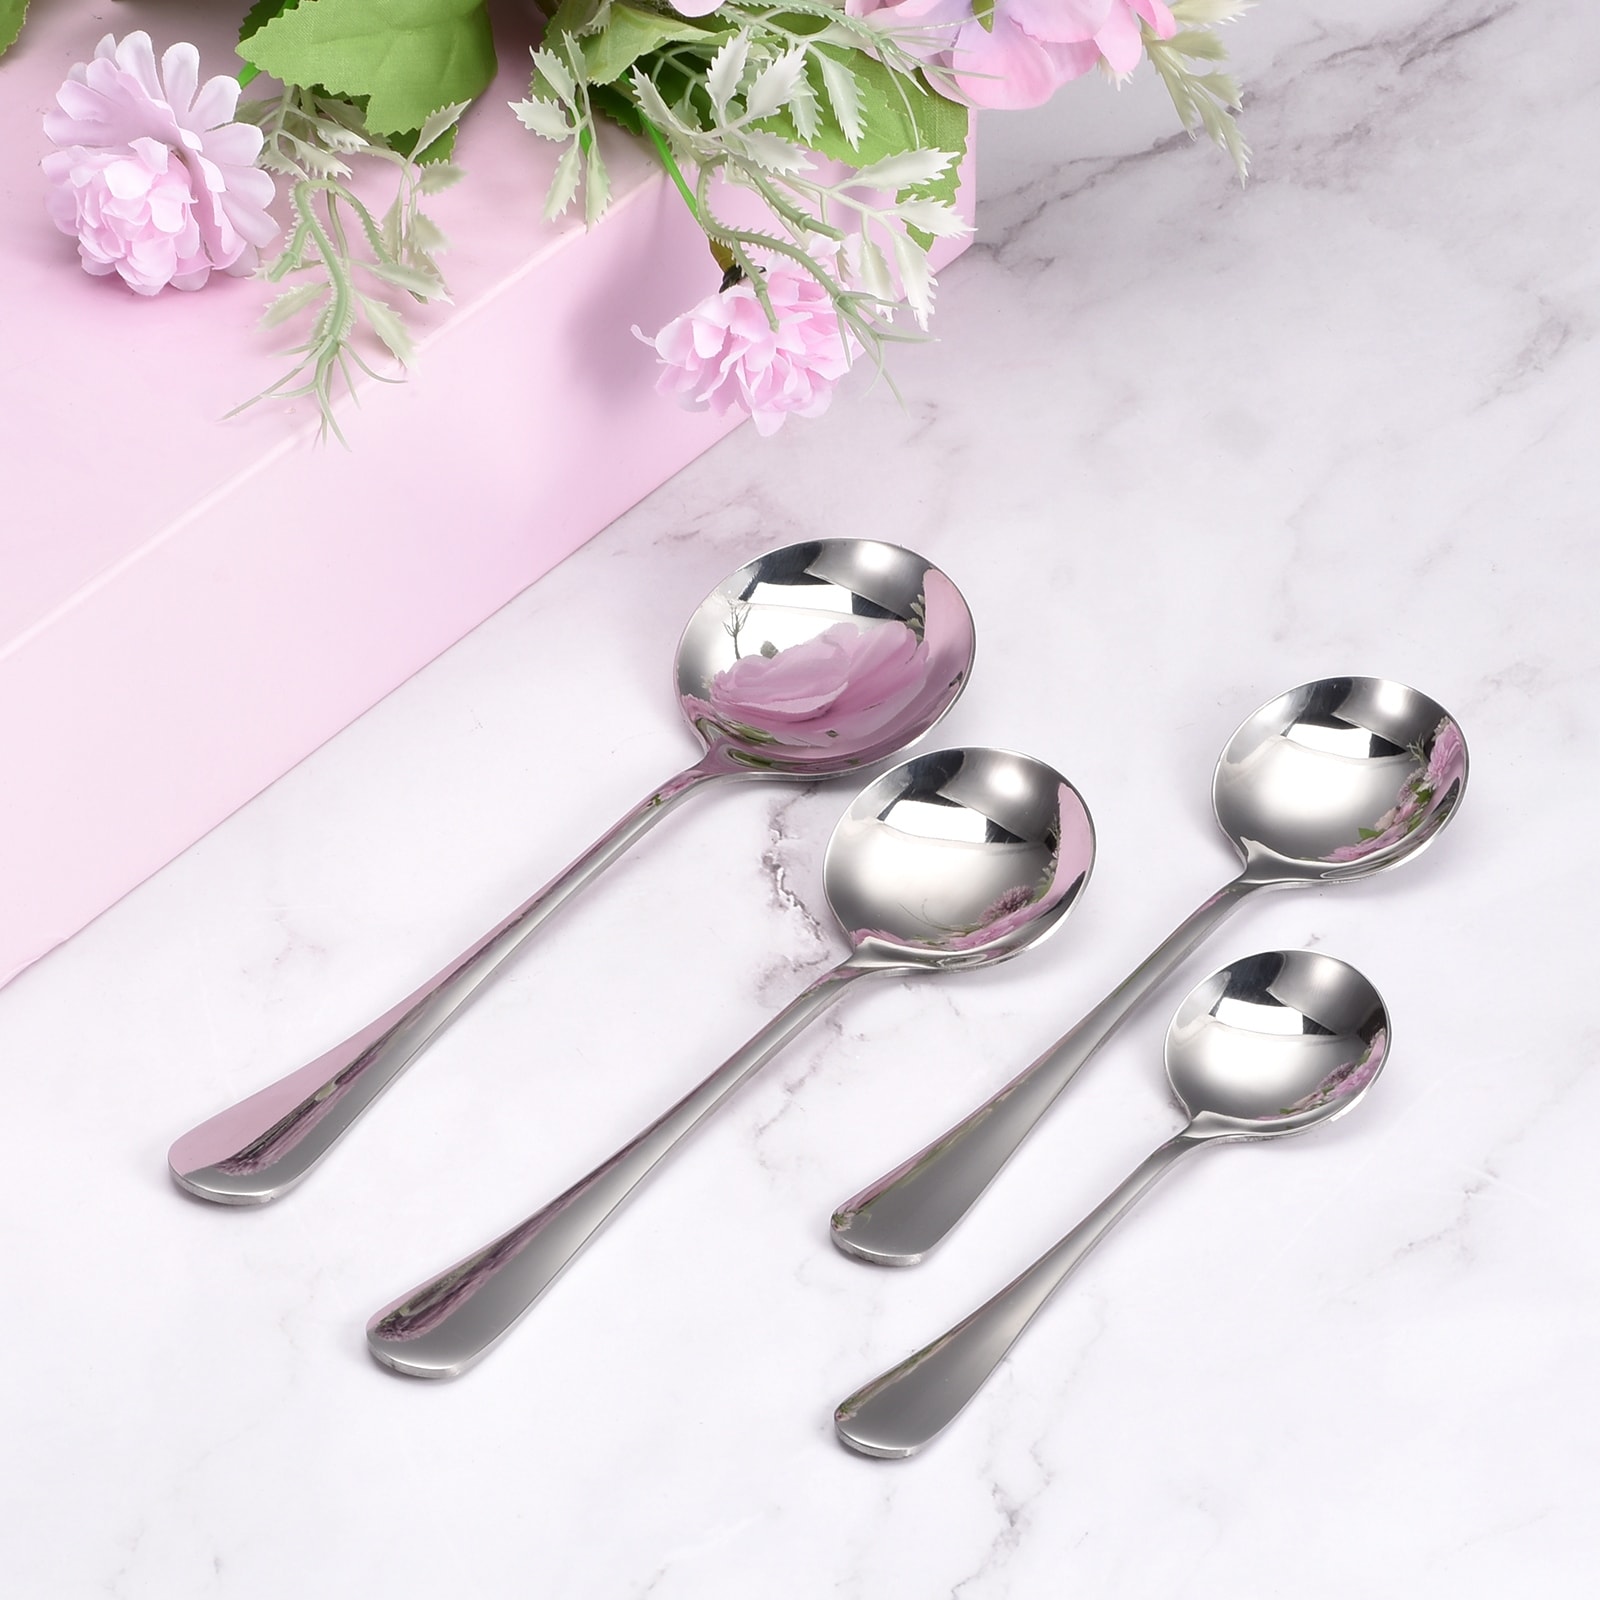 6Pcs 5.1" Stainless Steel Soup Spoon Tea Spoons Round Dinner Spoons - Silver